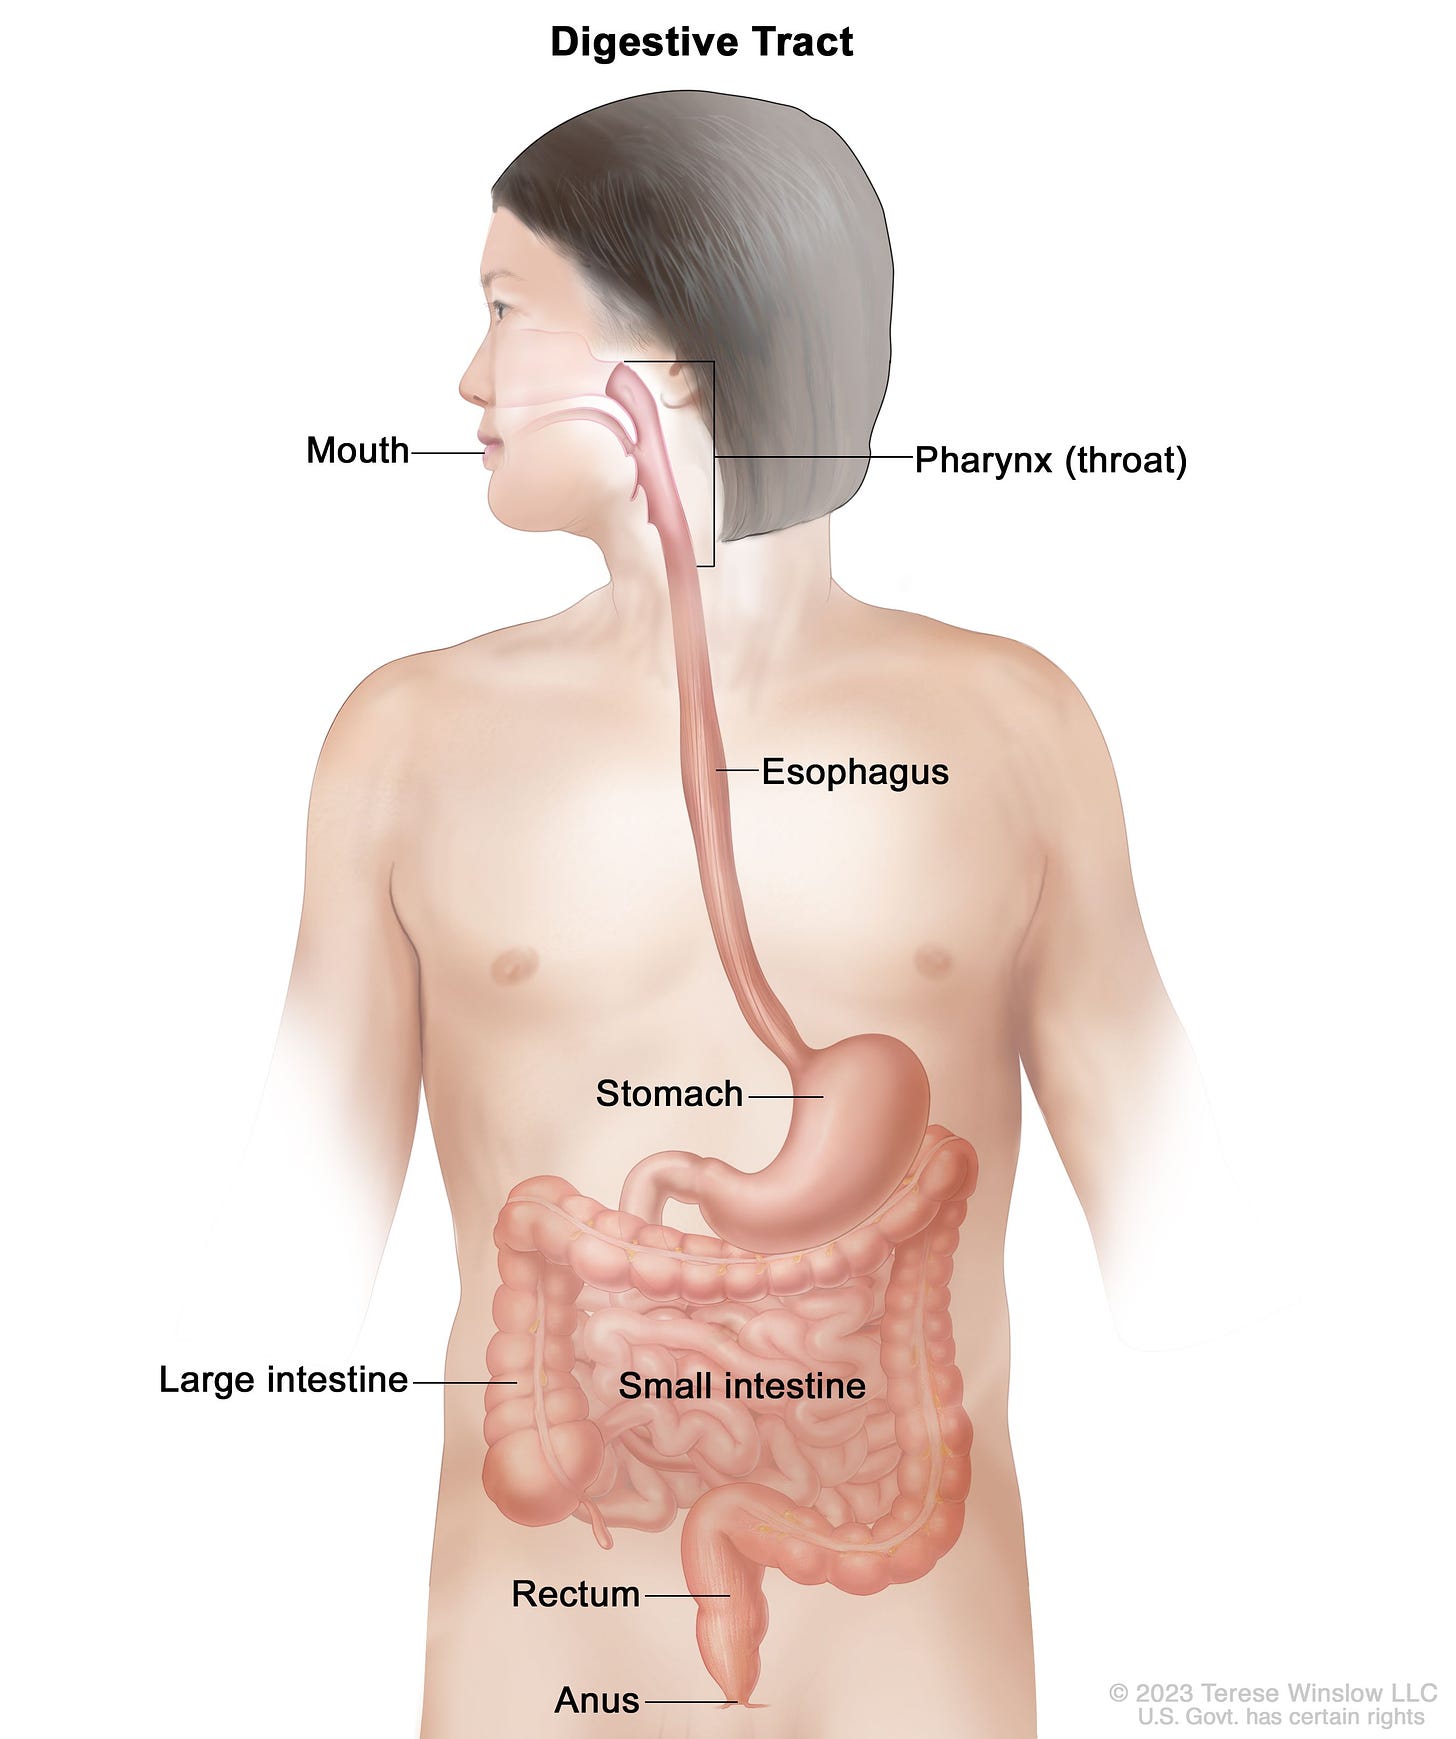 Definition of gastrointestinal tract - NCI Dictionary of Cancer Terms - NCI